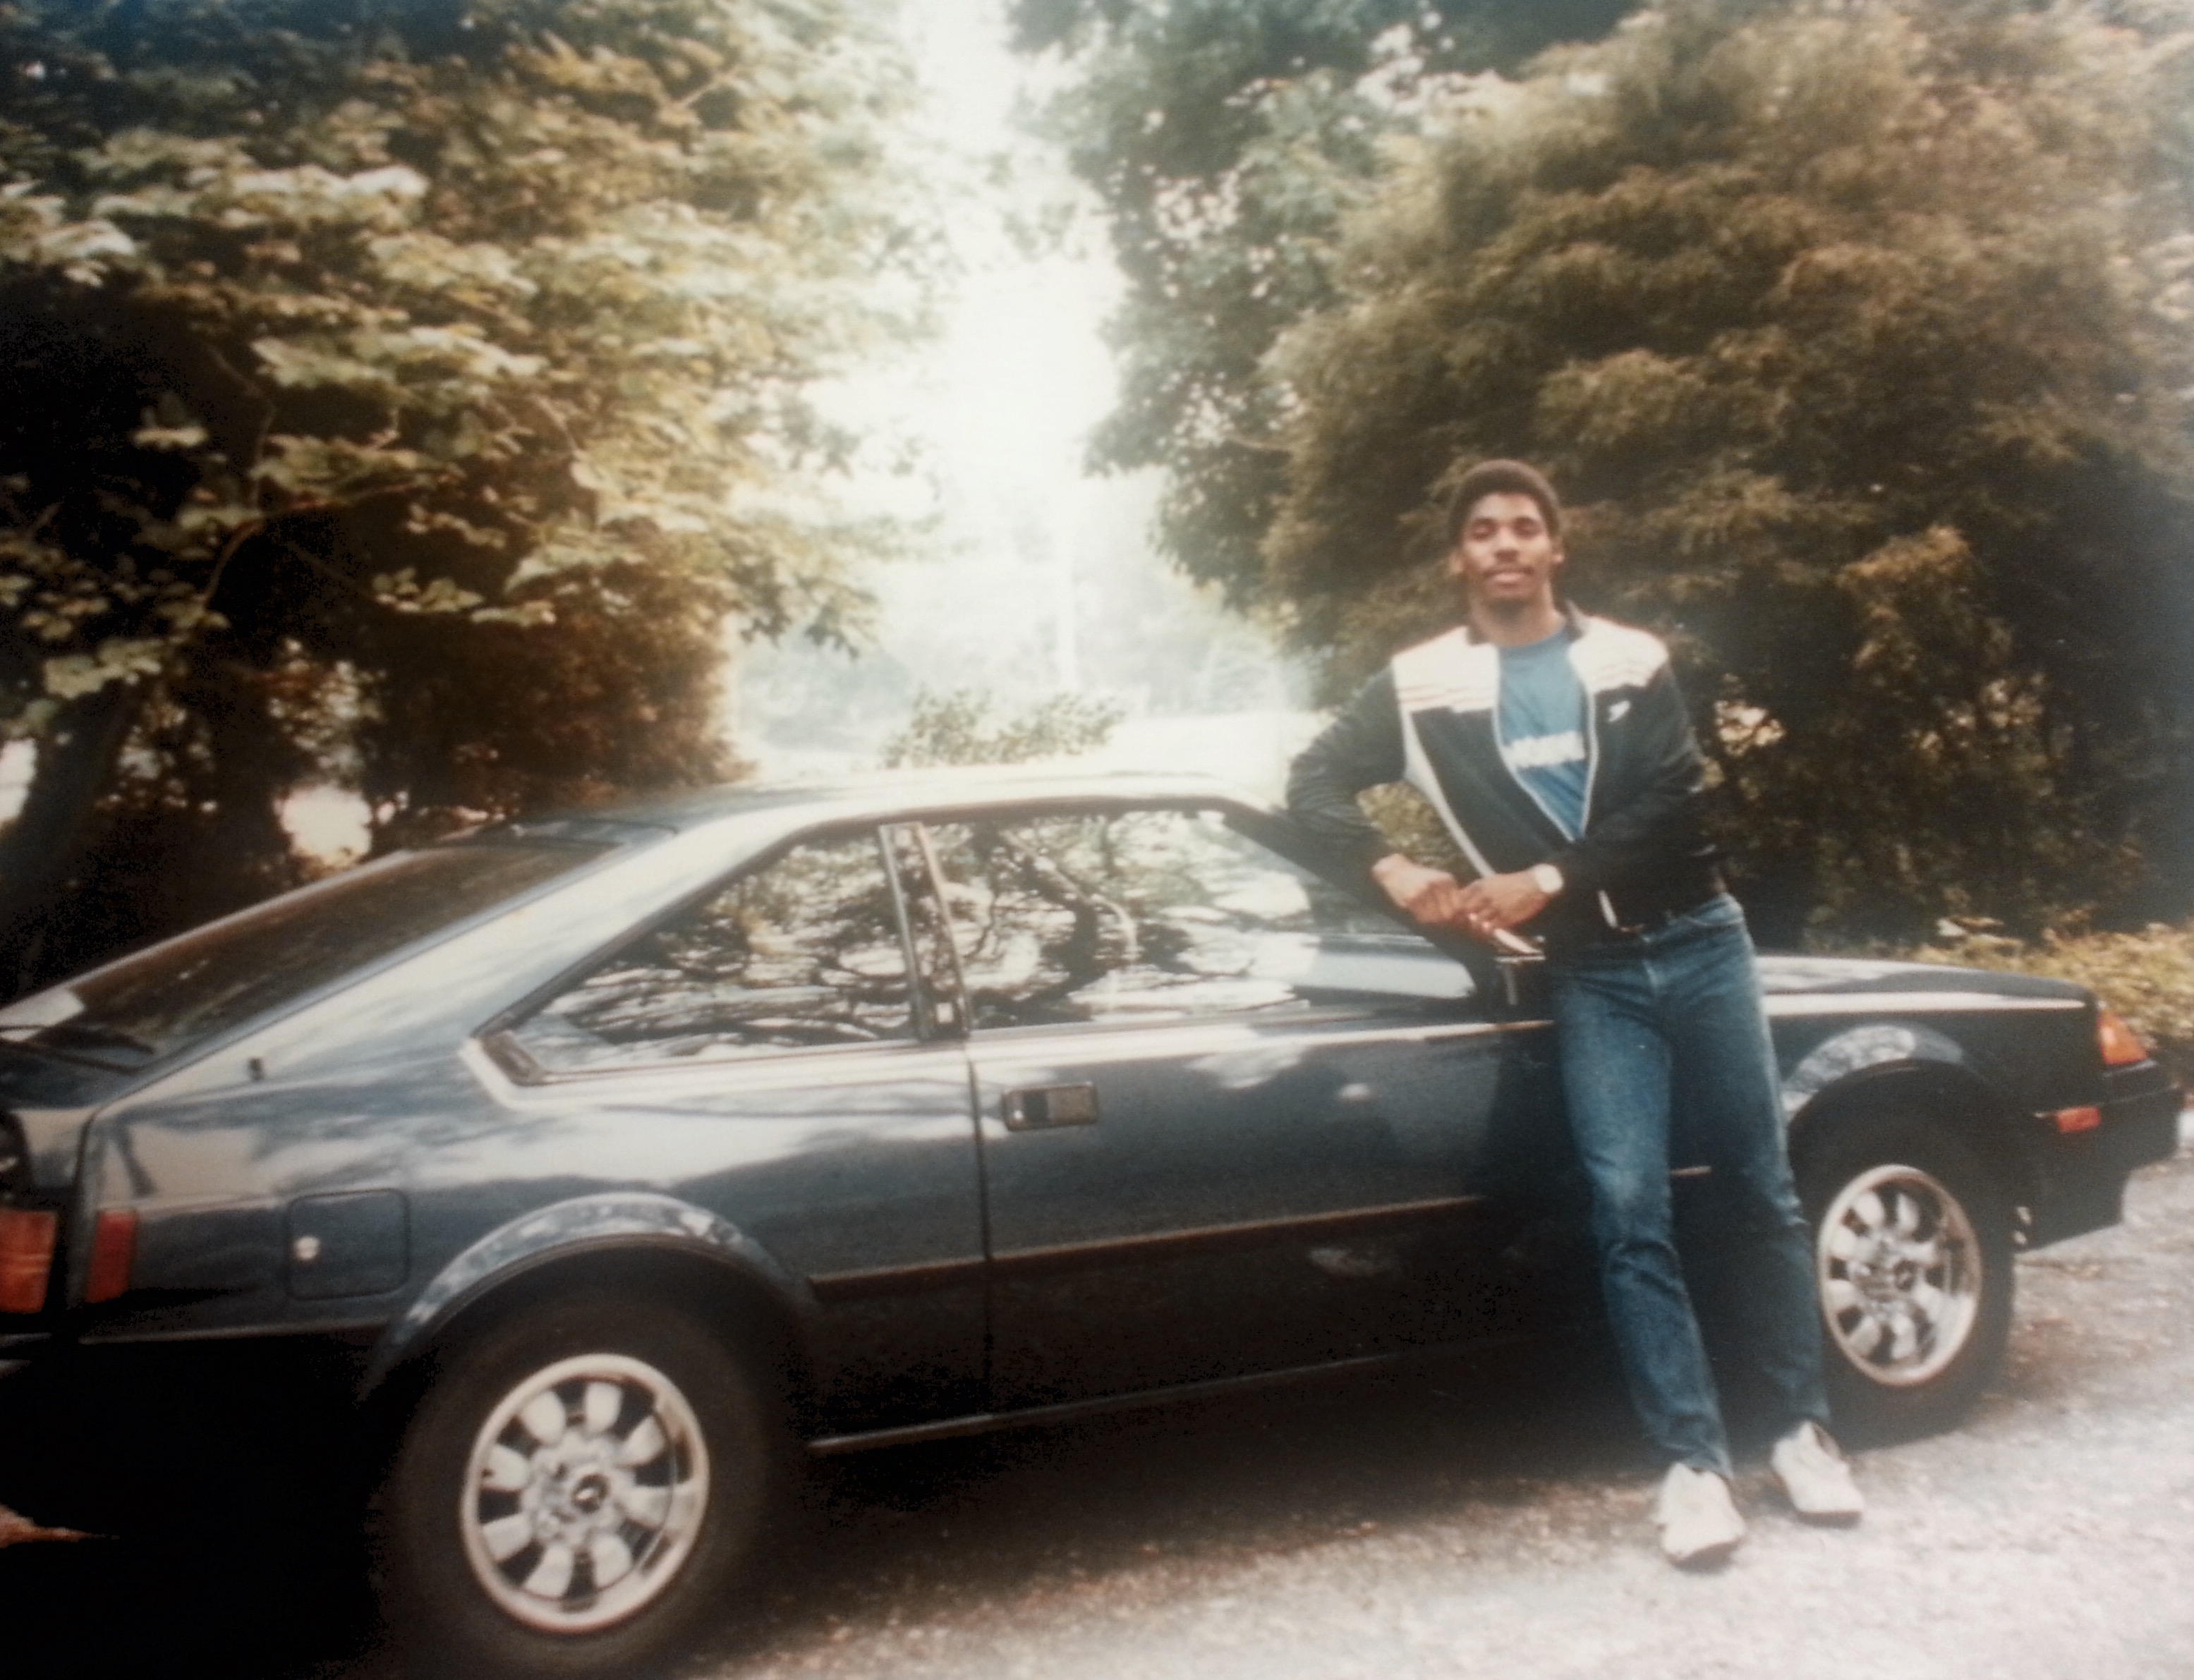 1983 Stephen’s first car. Toyota Celica GT